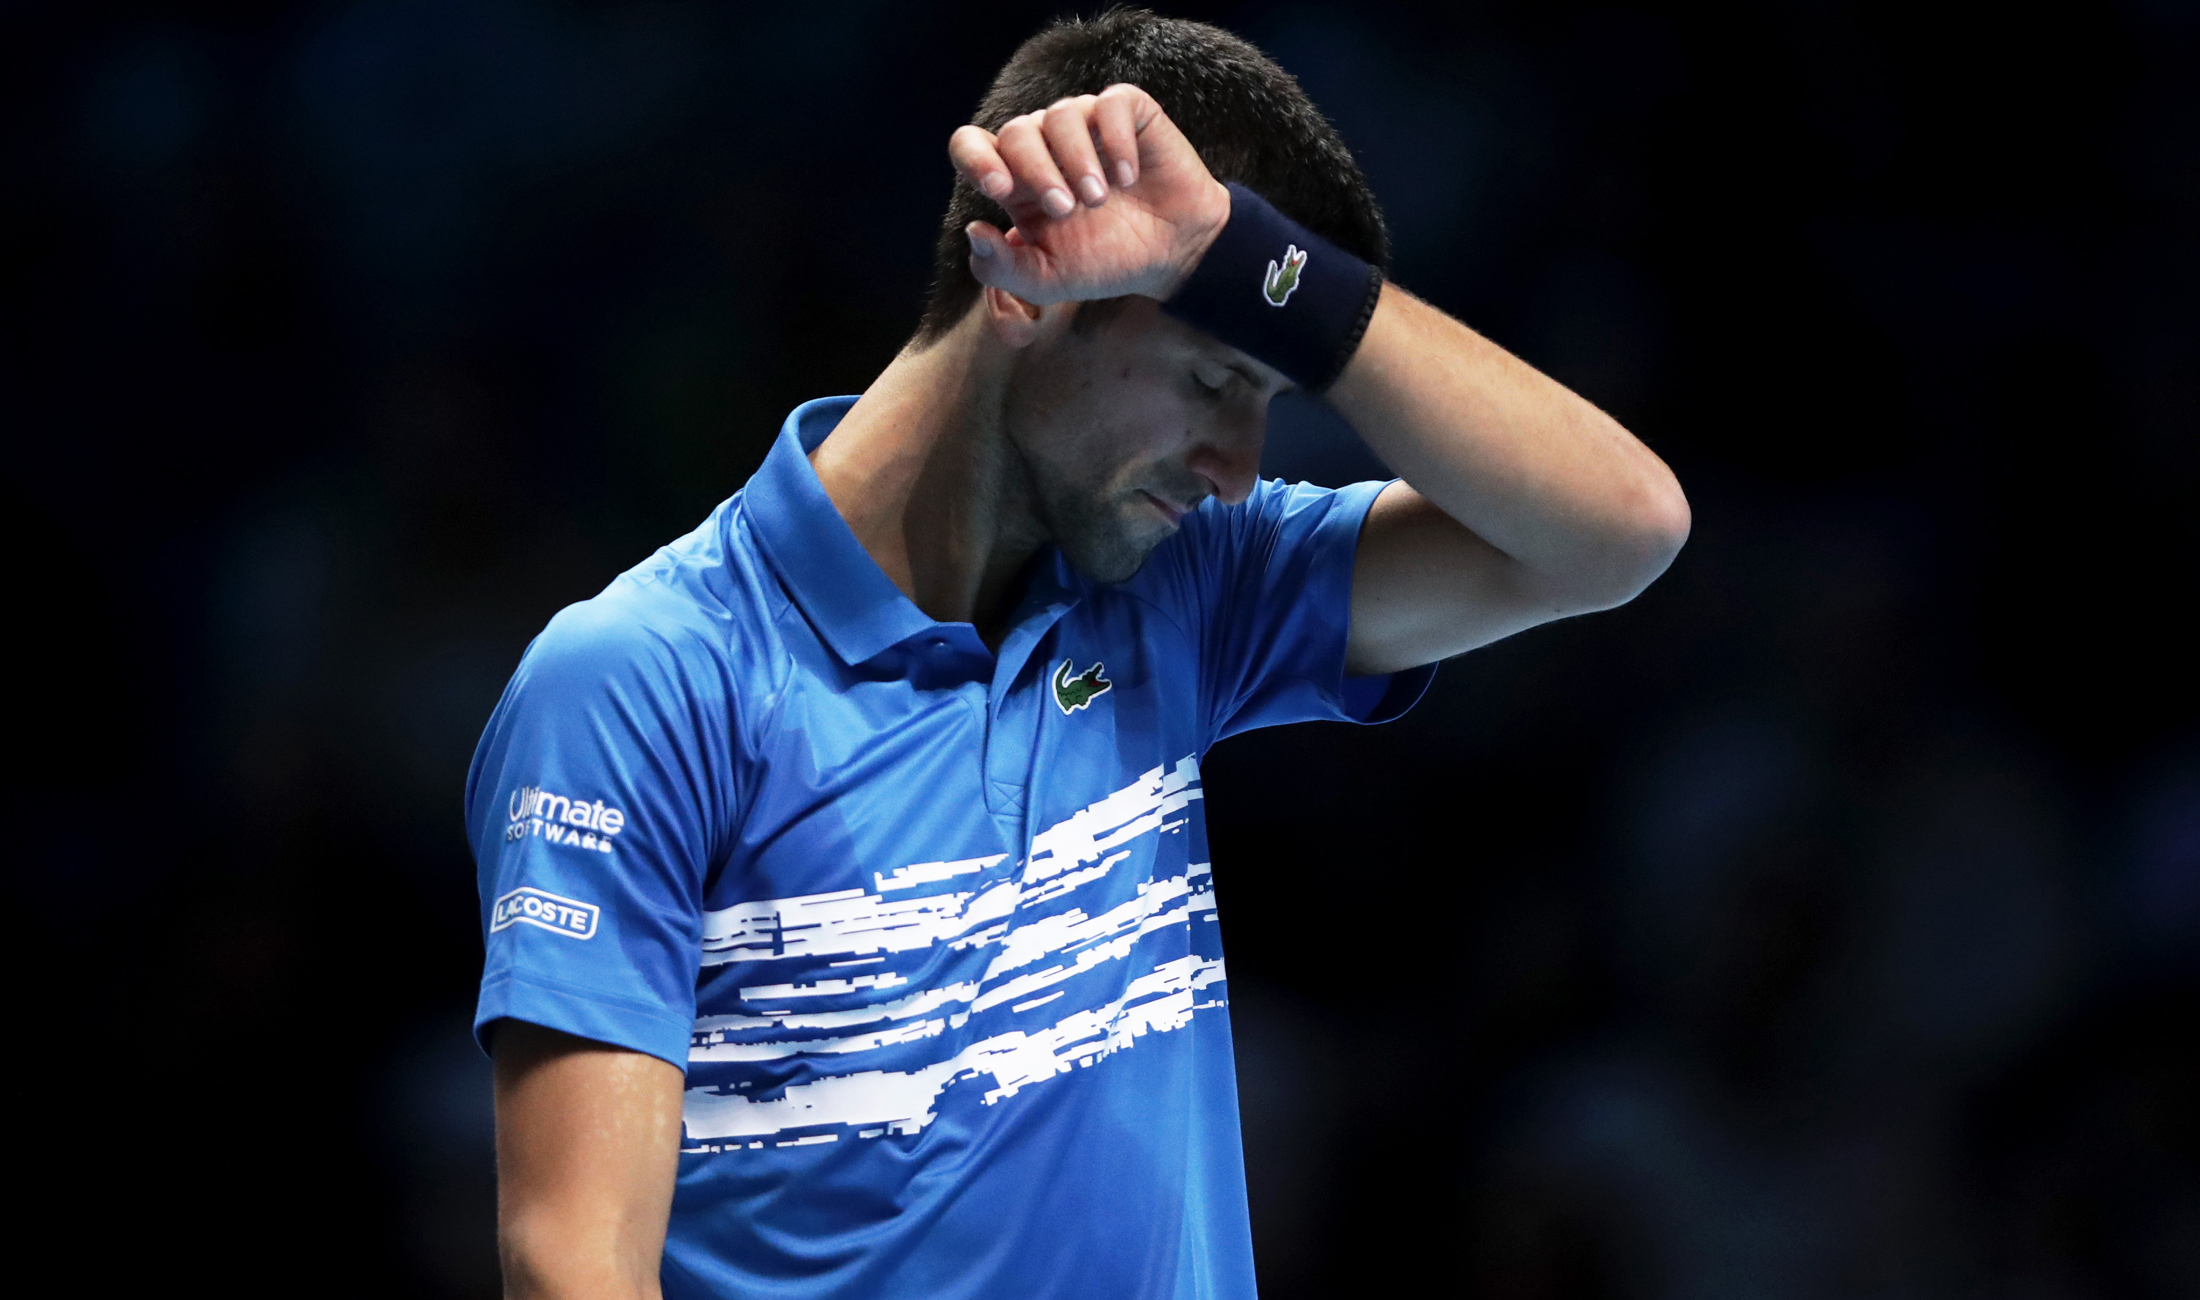 Despite concerns over his elbow, Novak Djokovic is set to play at the Davis Cup Finals.